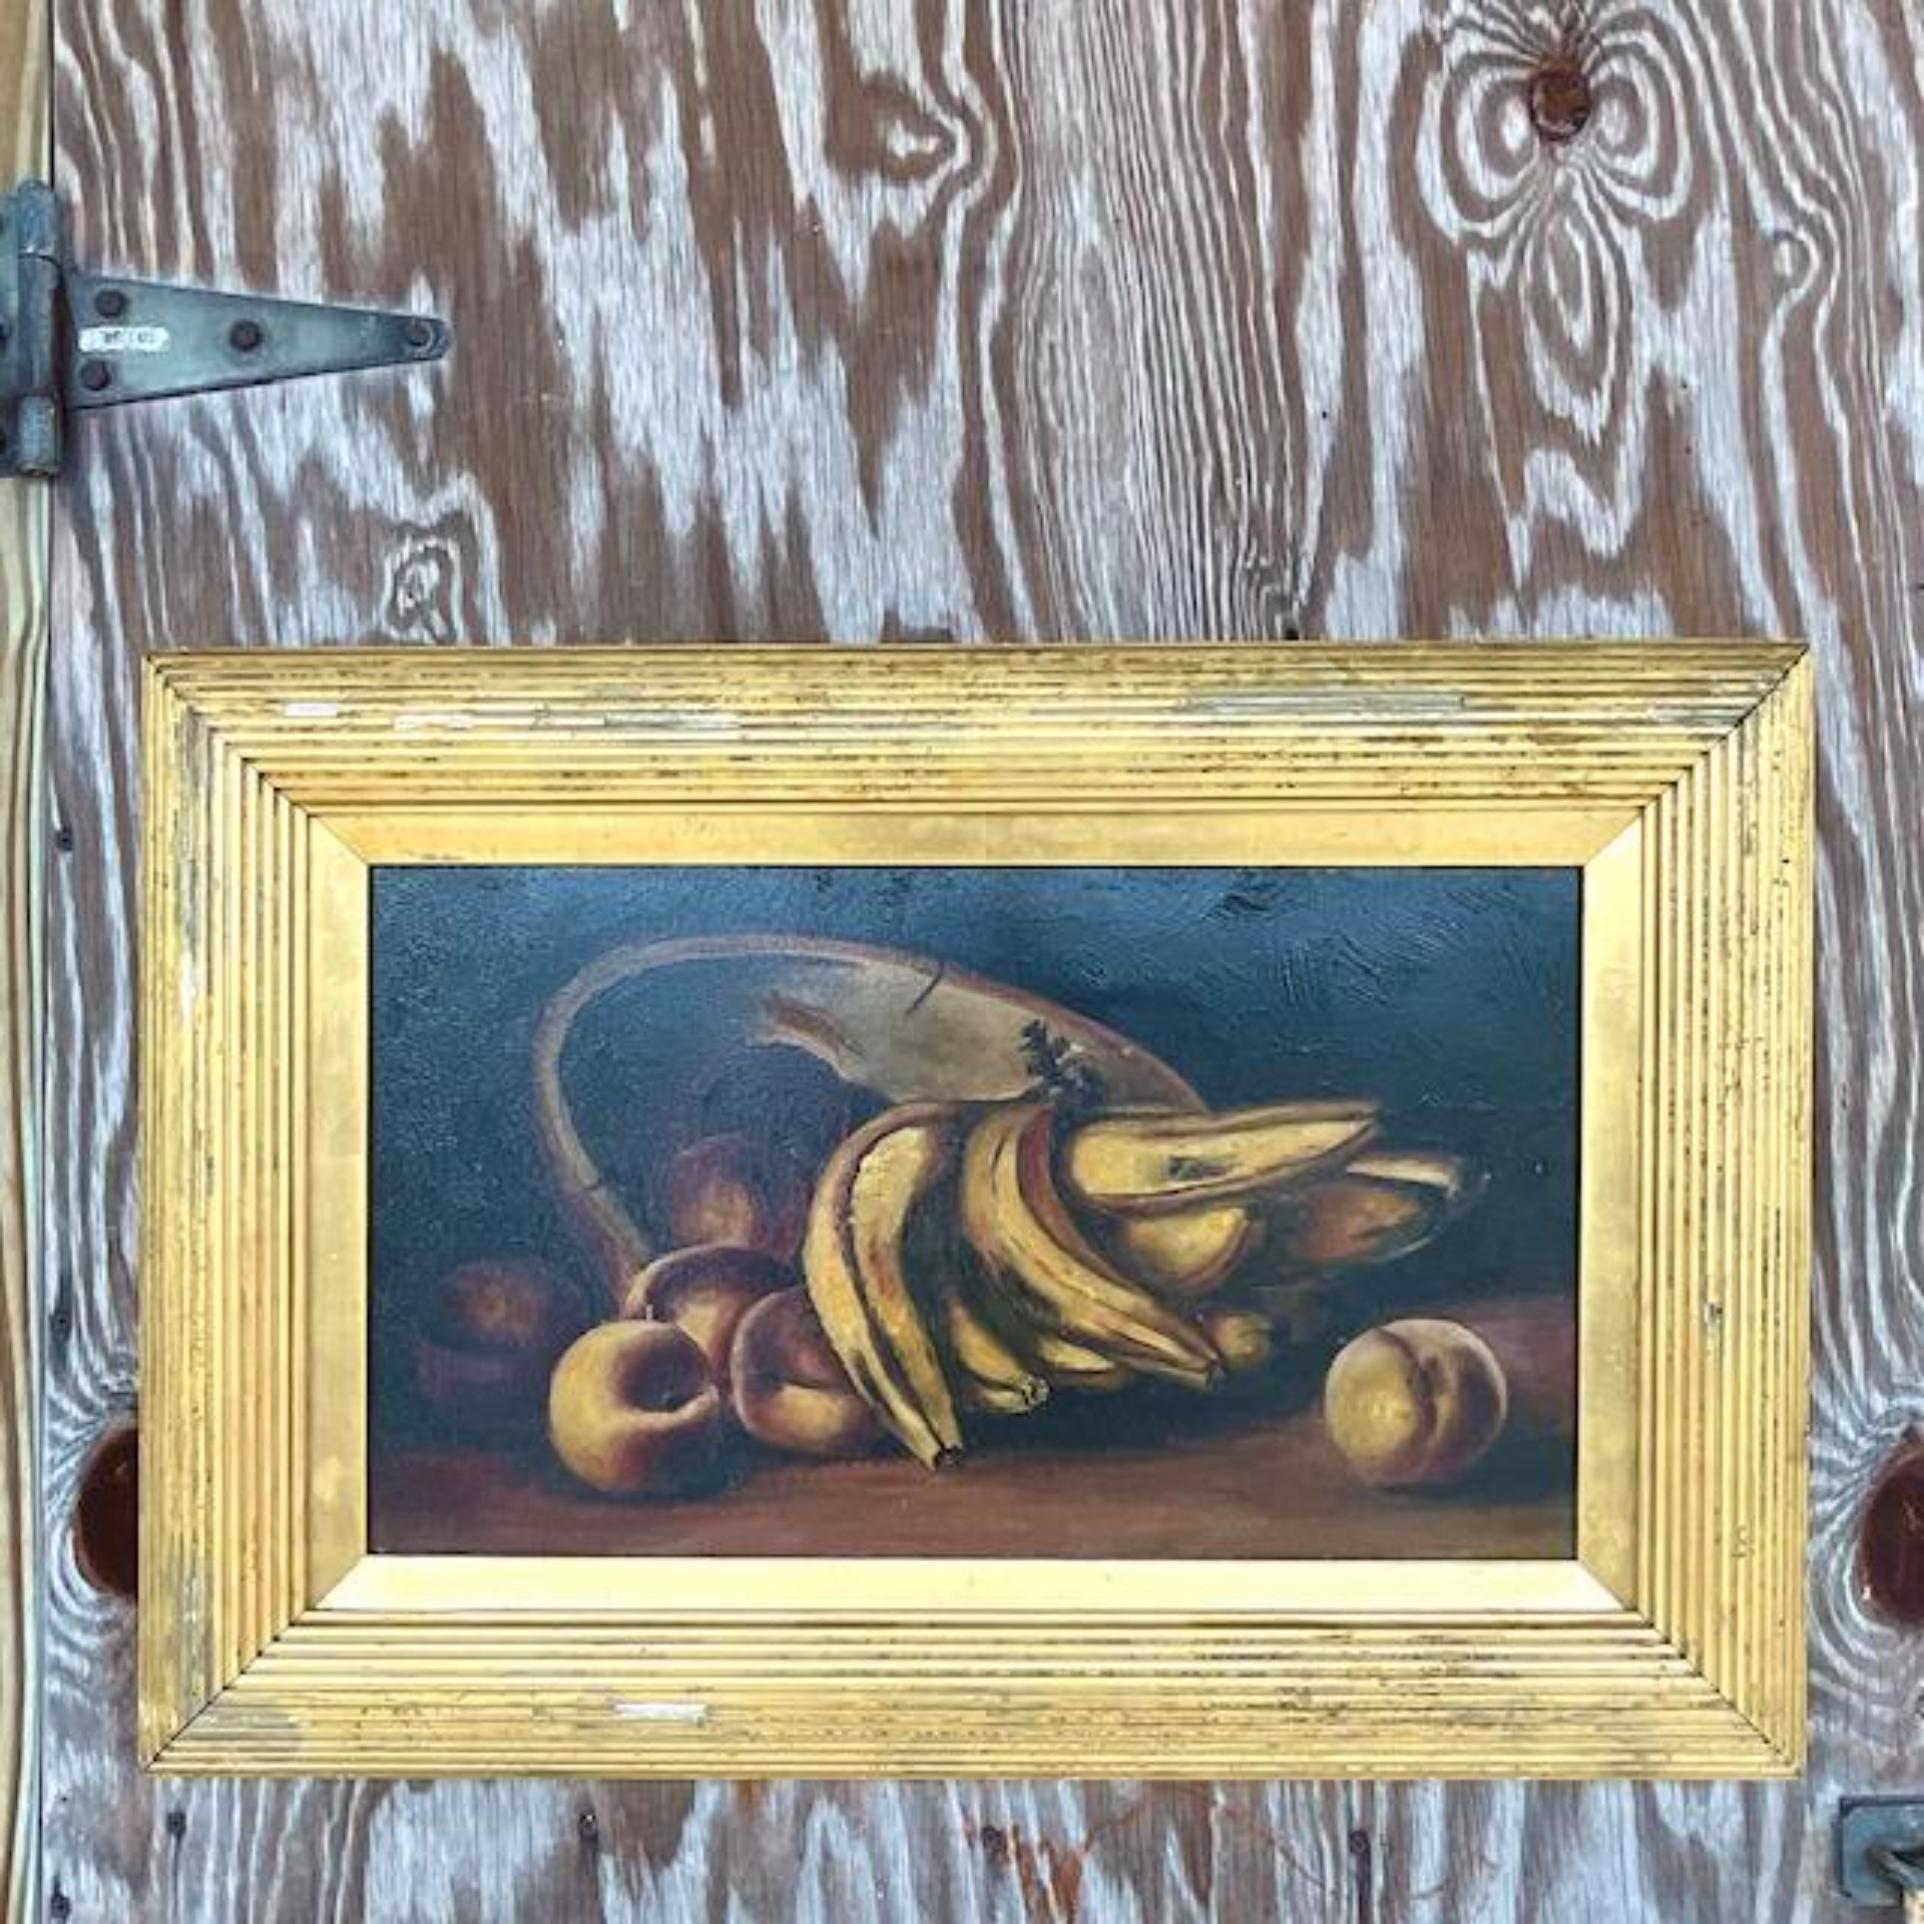 A striking vintage original oil painting on board. A chic still life of bananas and other small fruits. A chic distressed period frame. Acquired from a Palm Beach estate.